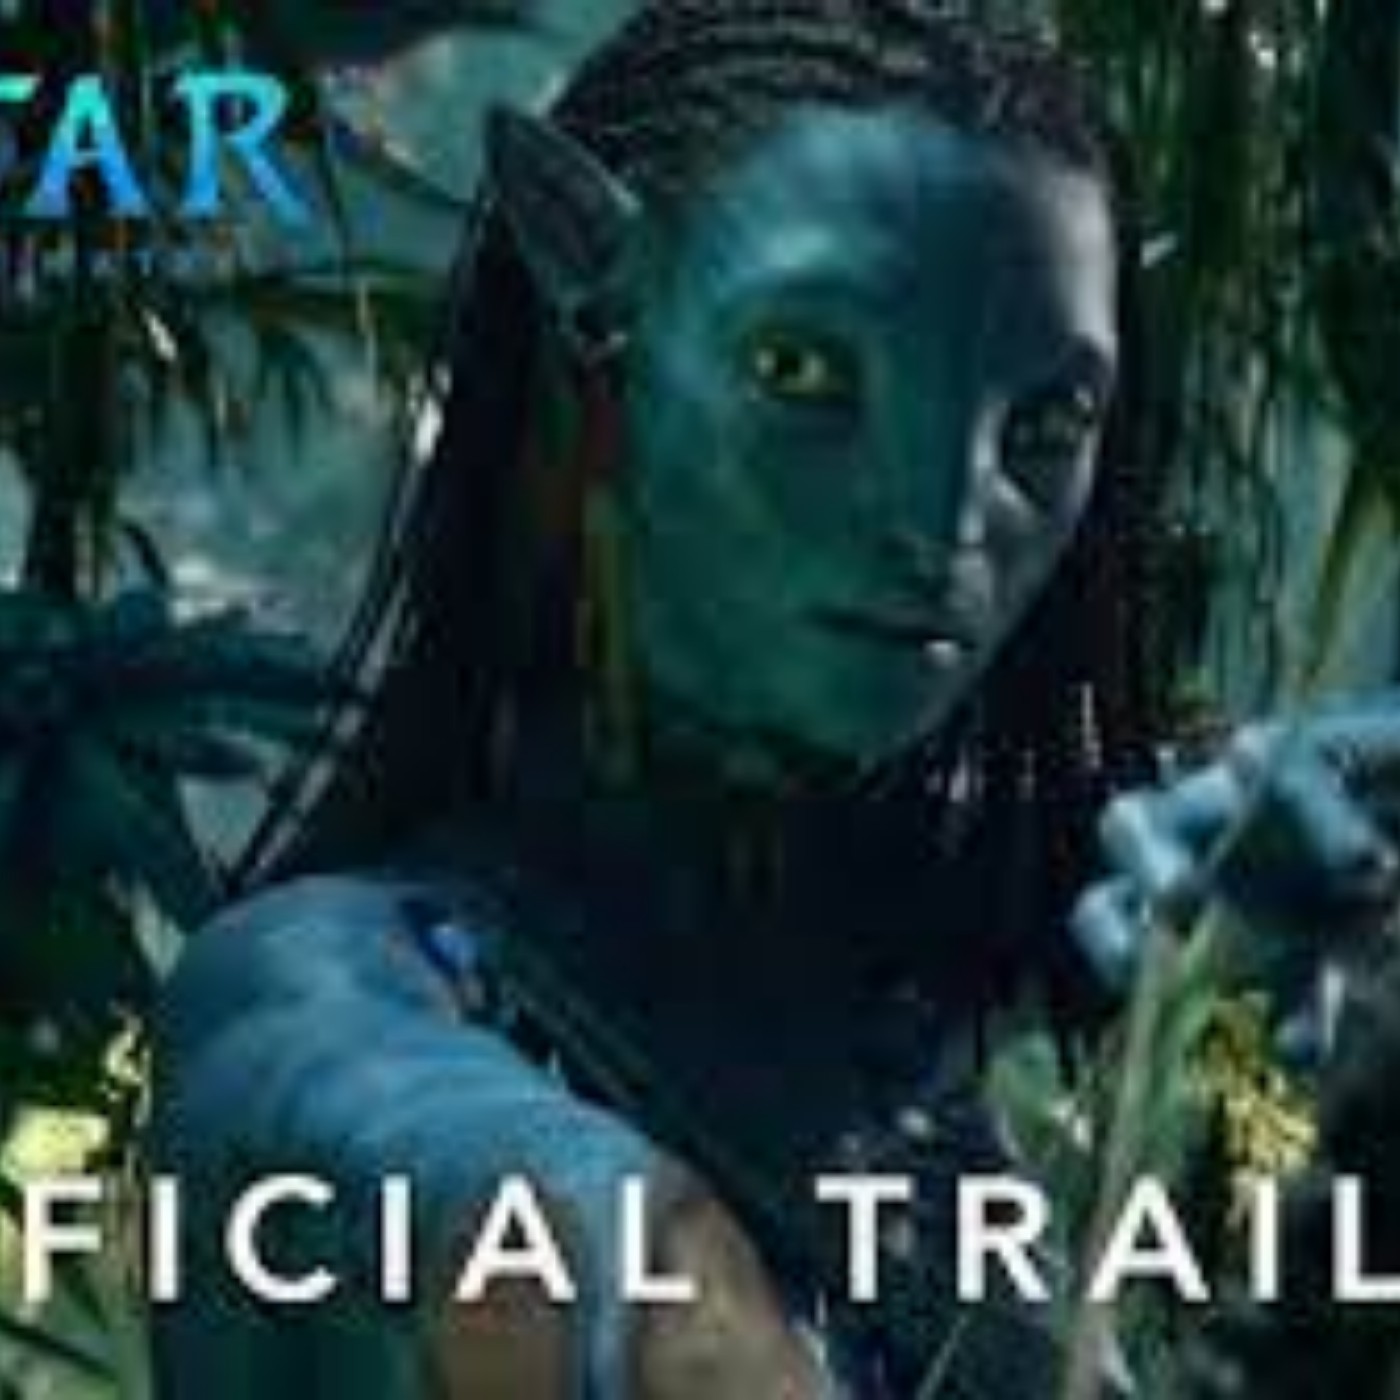 WATCH^ Avatar The Way of Water Forever (2022) FULLMOVIE FREE STREAMING ONLINE ON 123𝓶𝓸𝓿𝓲𝓮𝓼 Podcast on SoundOn